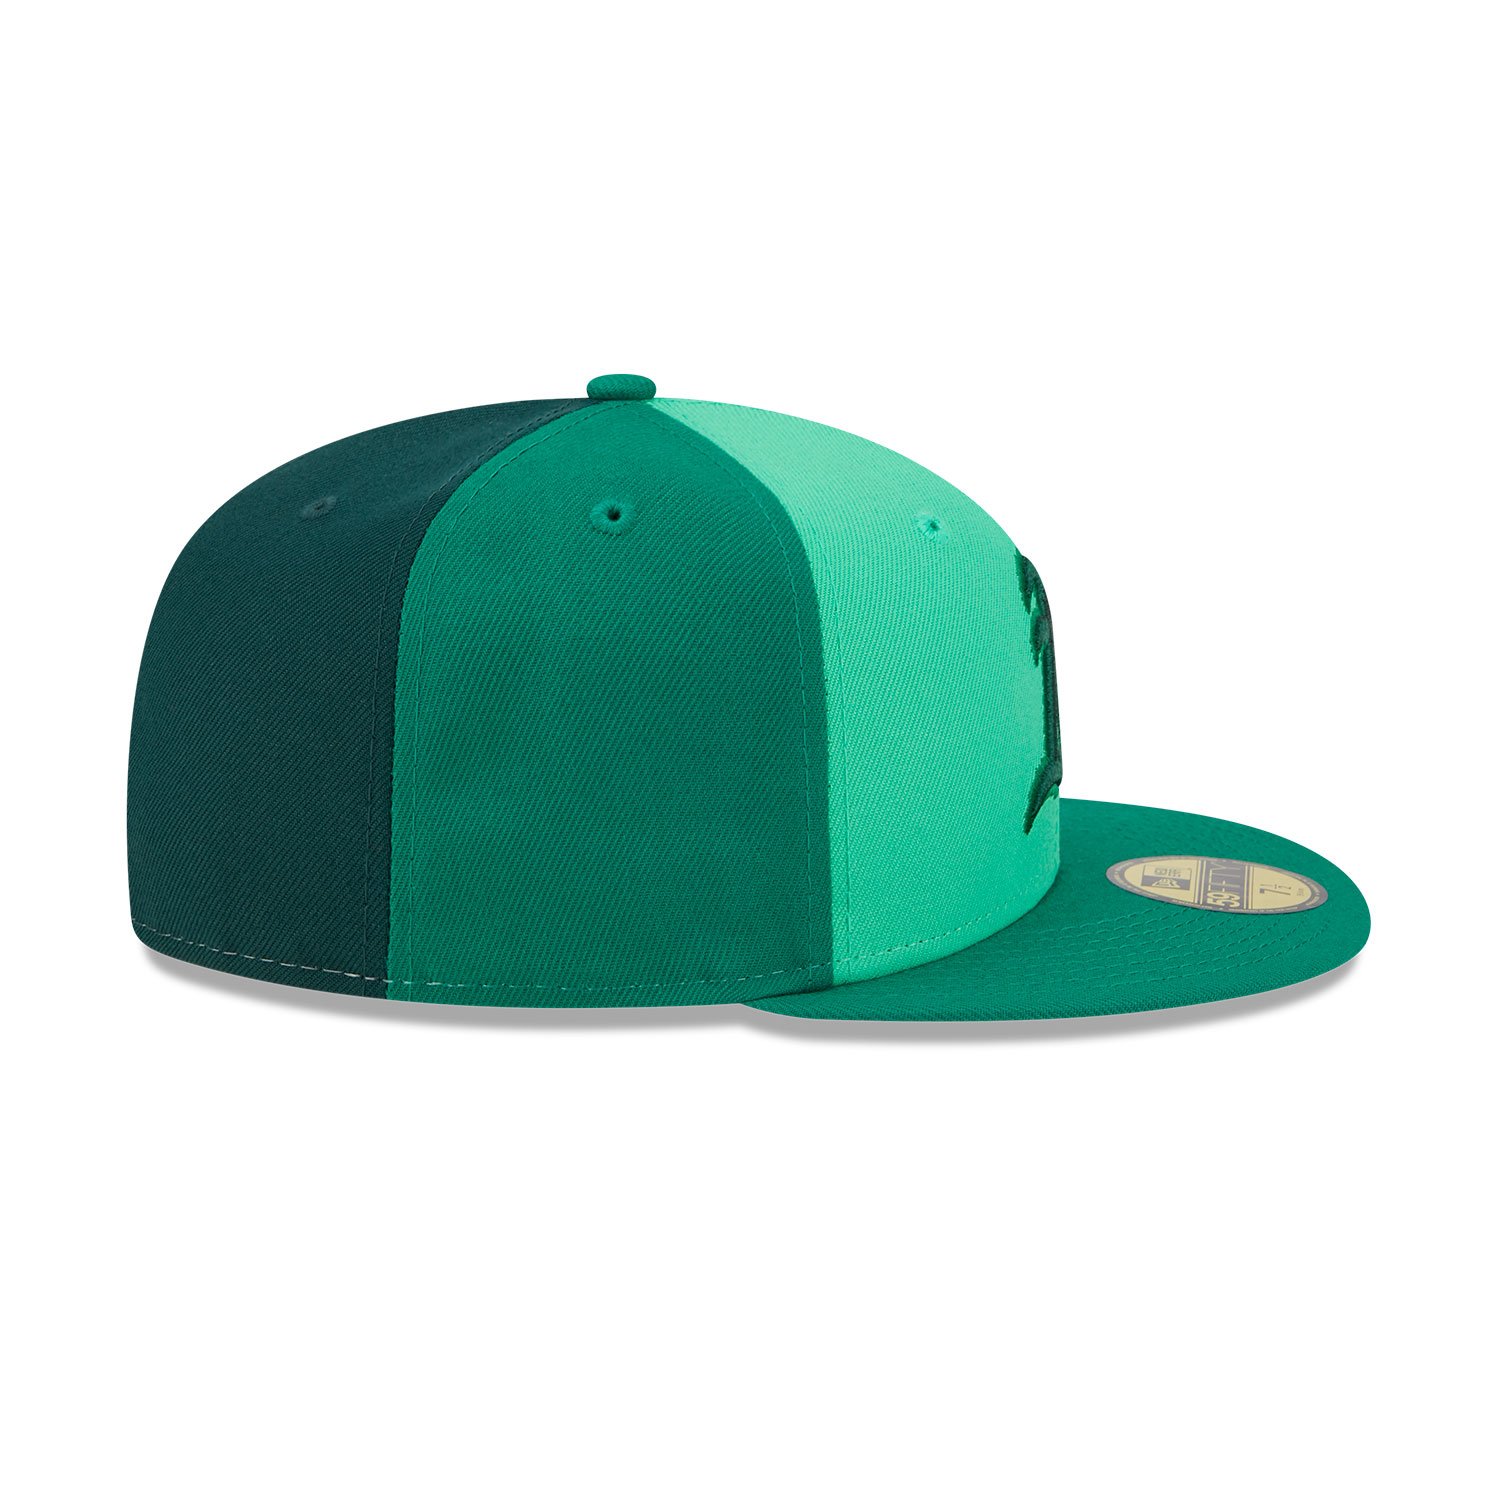 Oakland Athletics Tri Tone Team Green 59FIFTY Fitted Cap